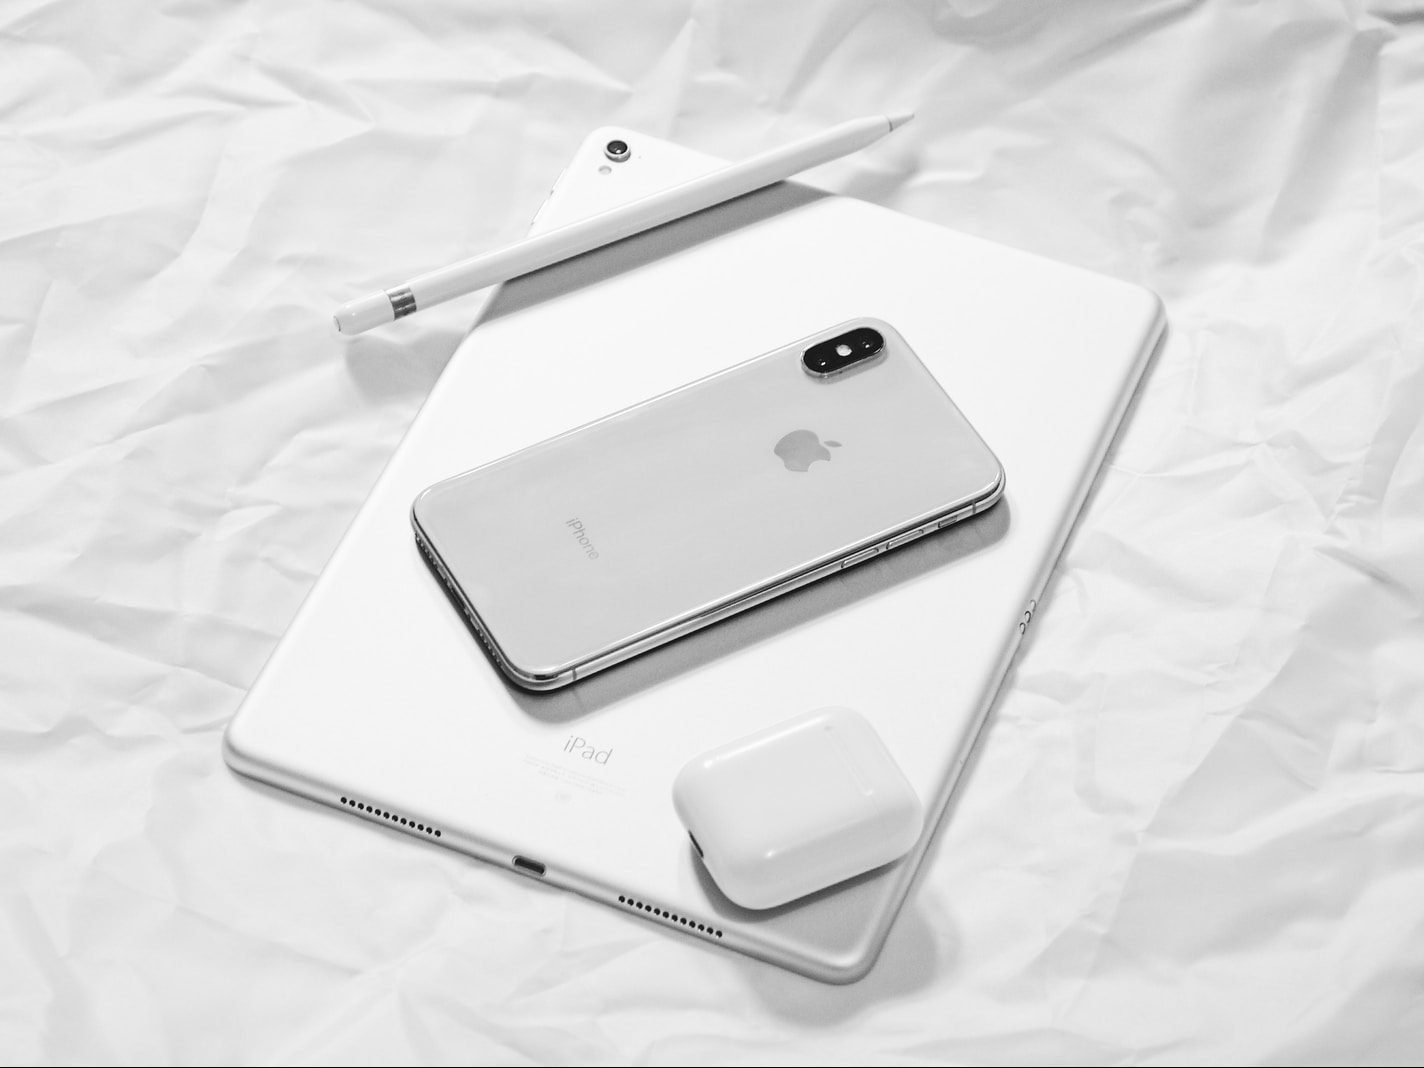 silver iPhone X with silver iPad